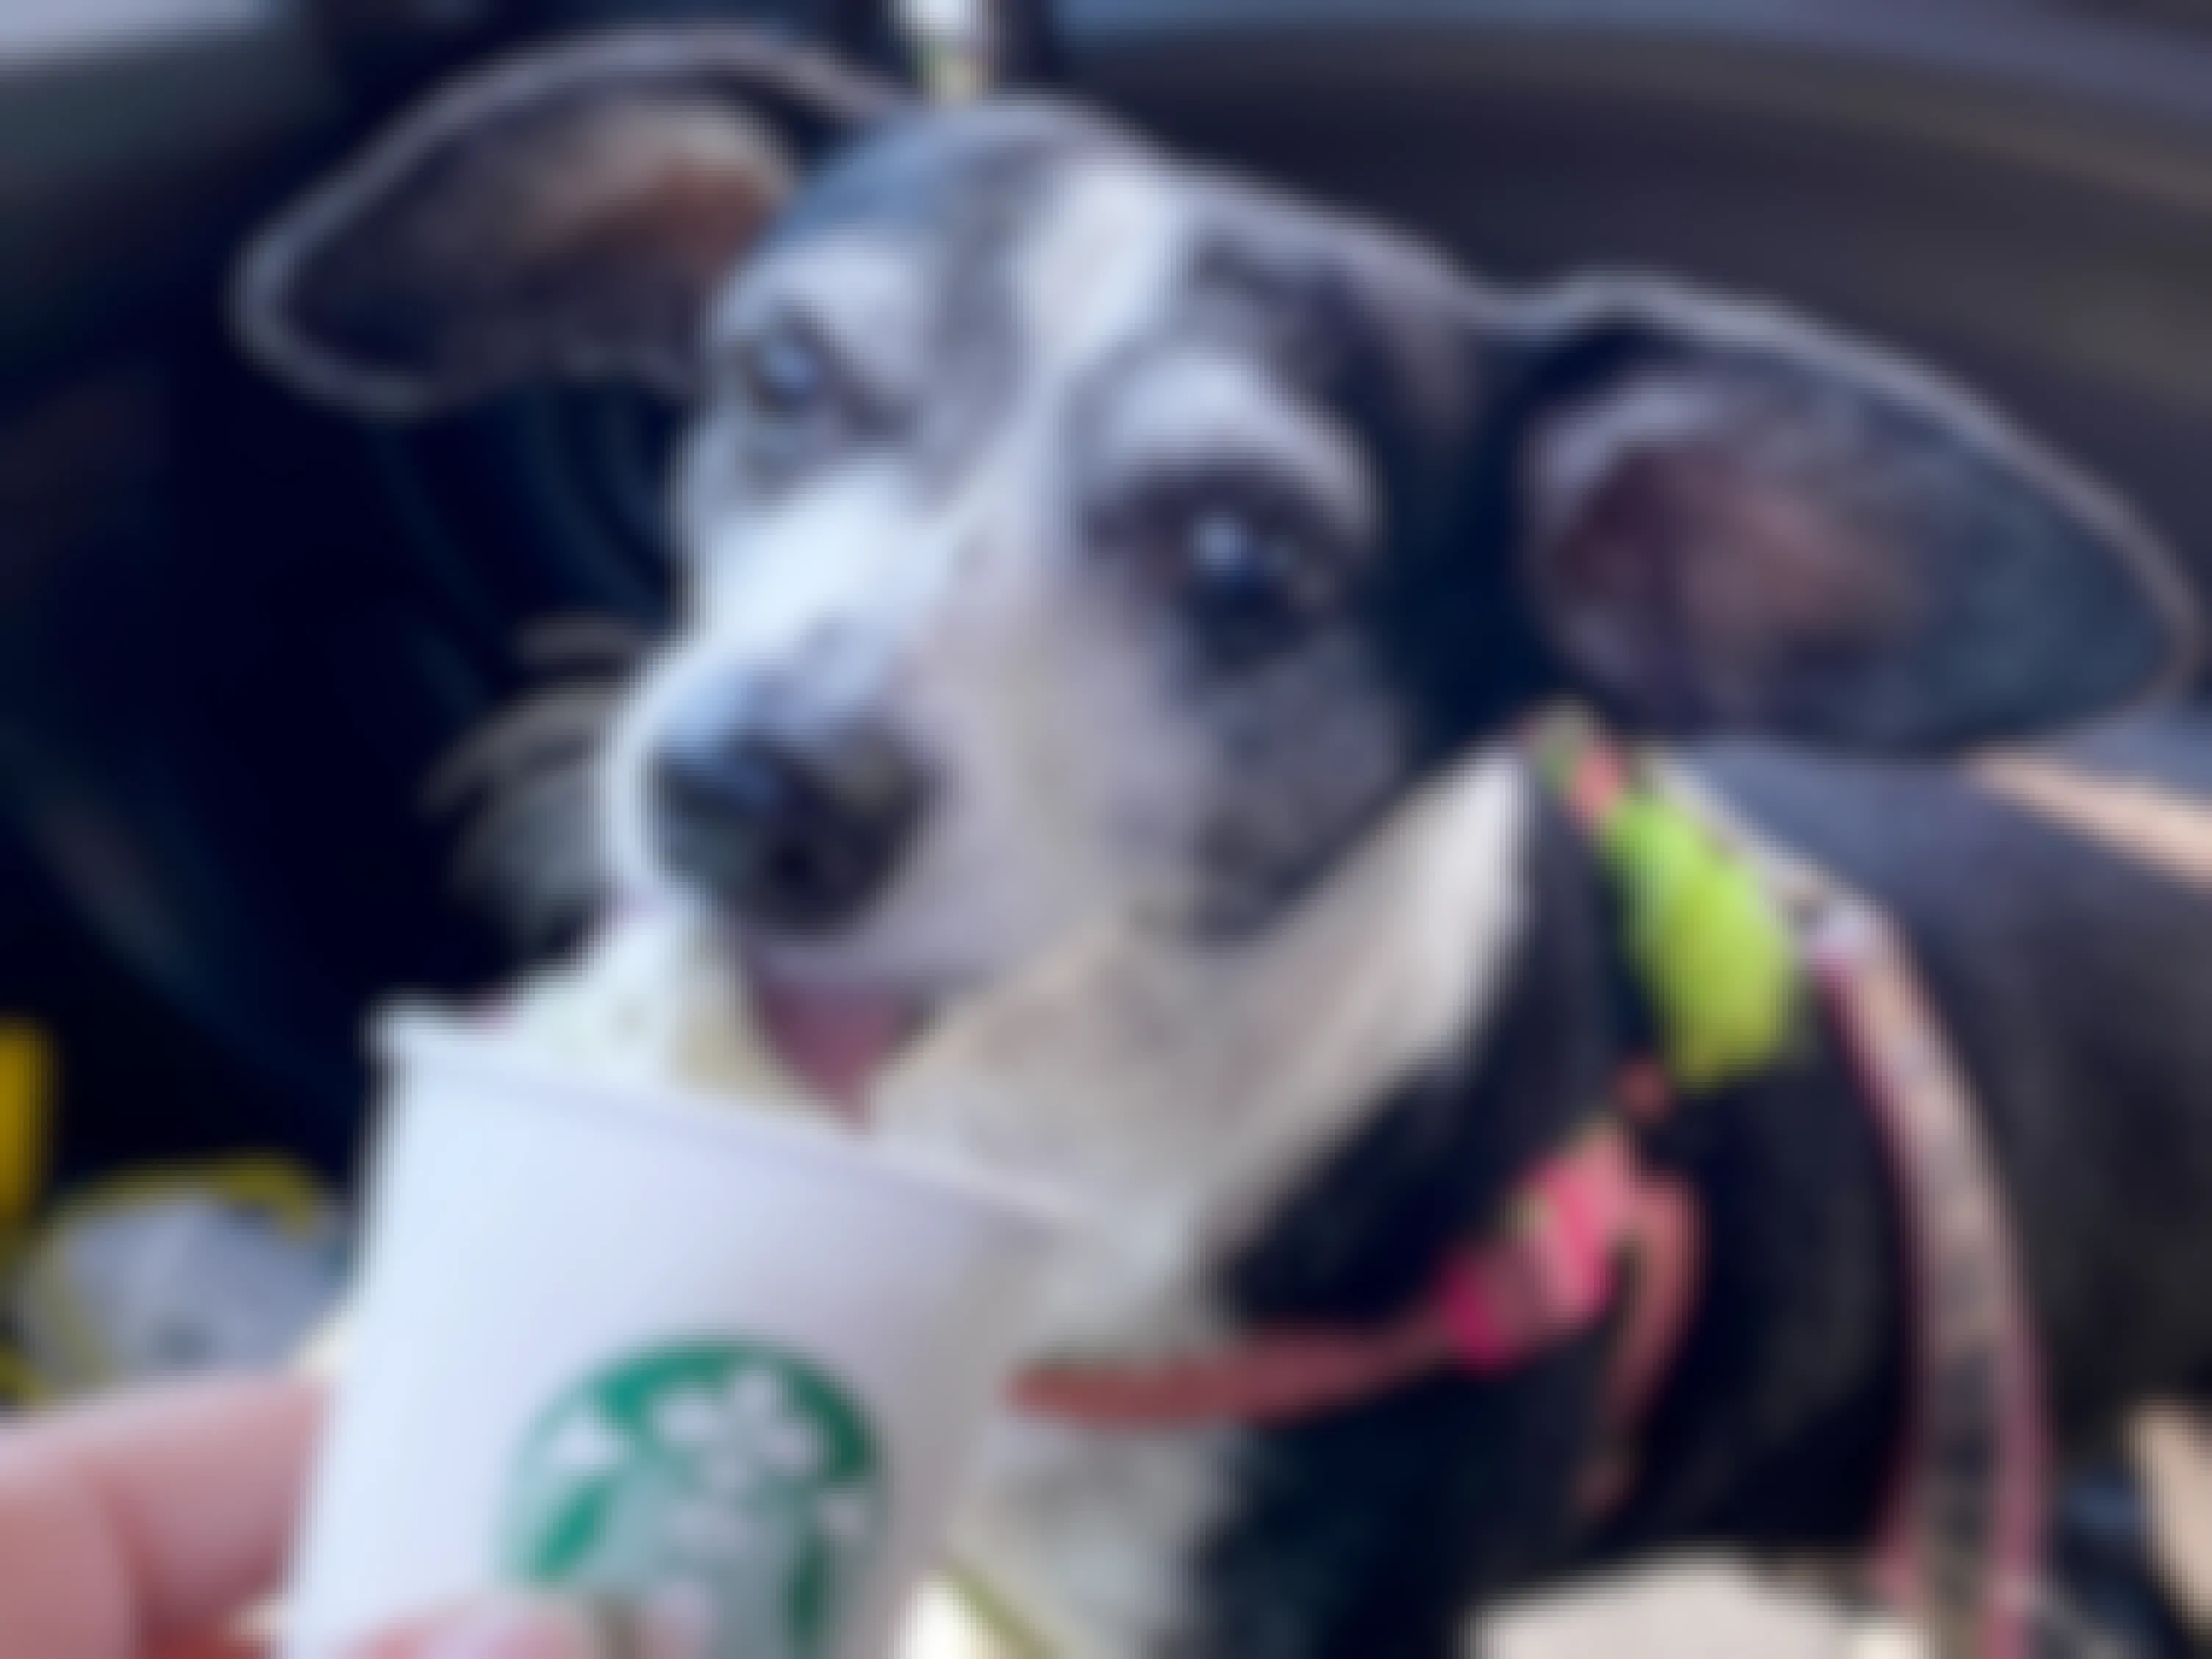 A dog licking whipped cream out of a small Starbucks cup.